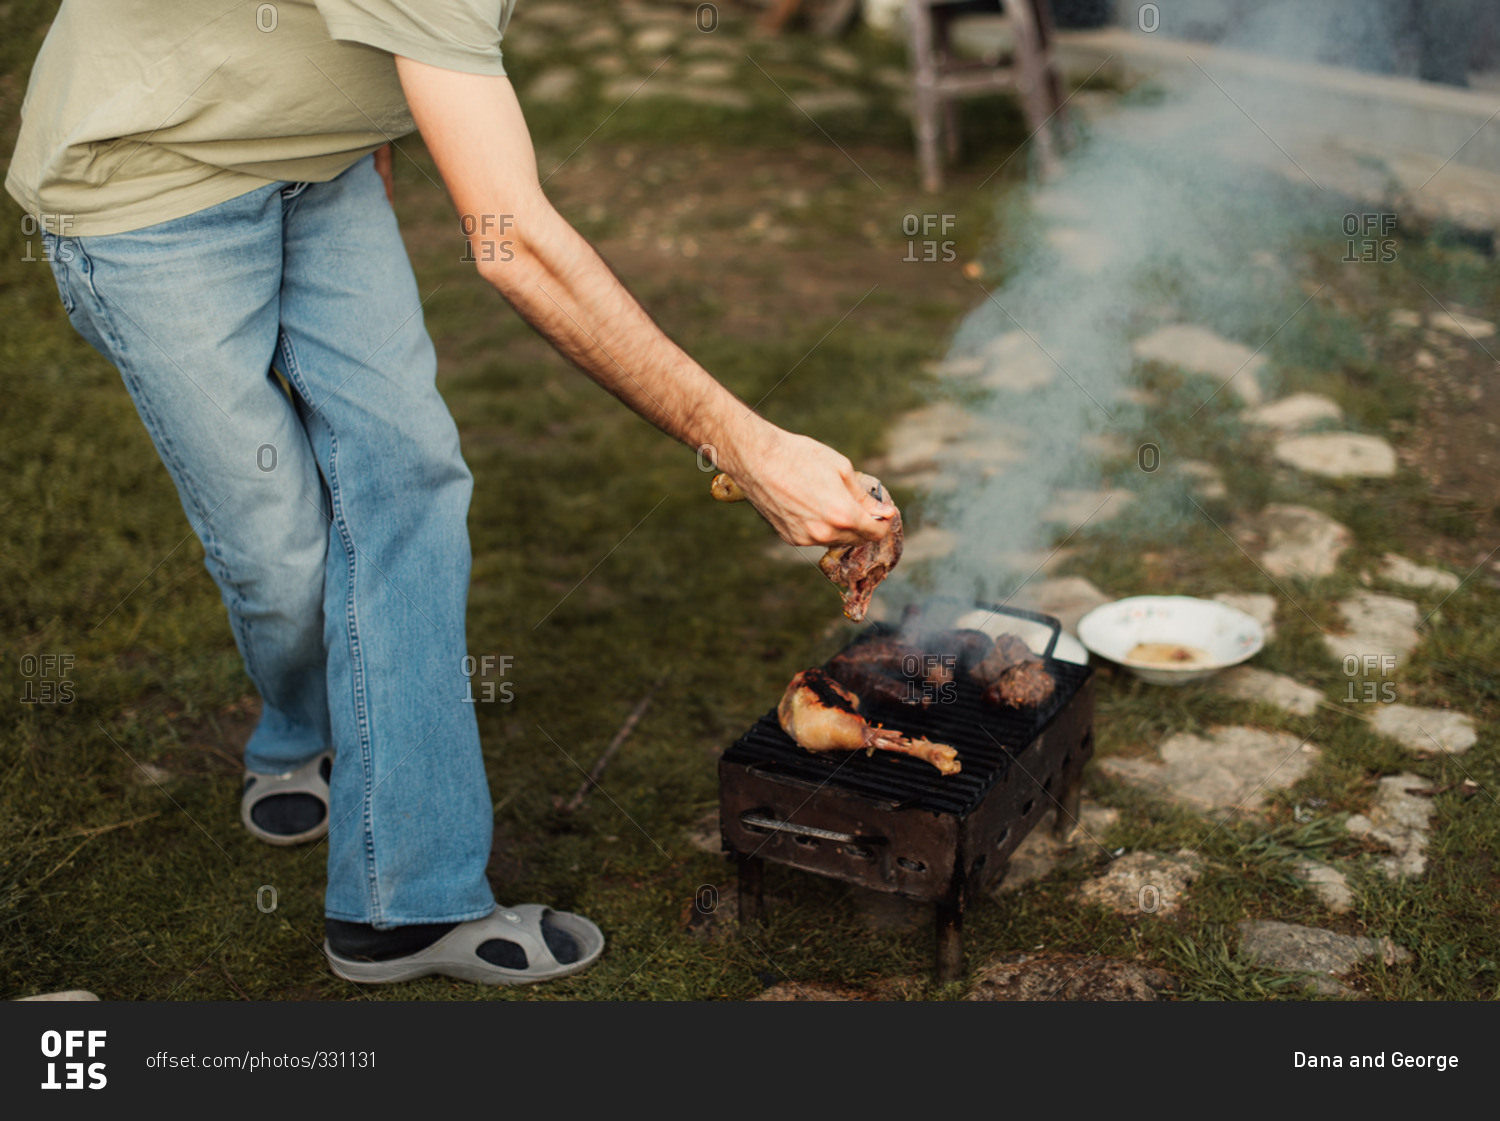 Man cooking food on small grill